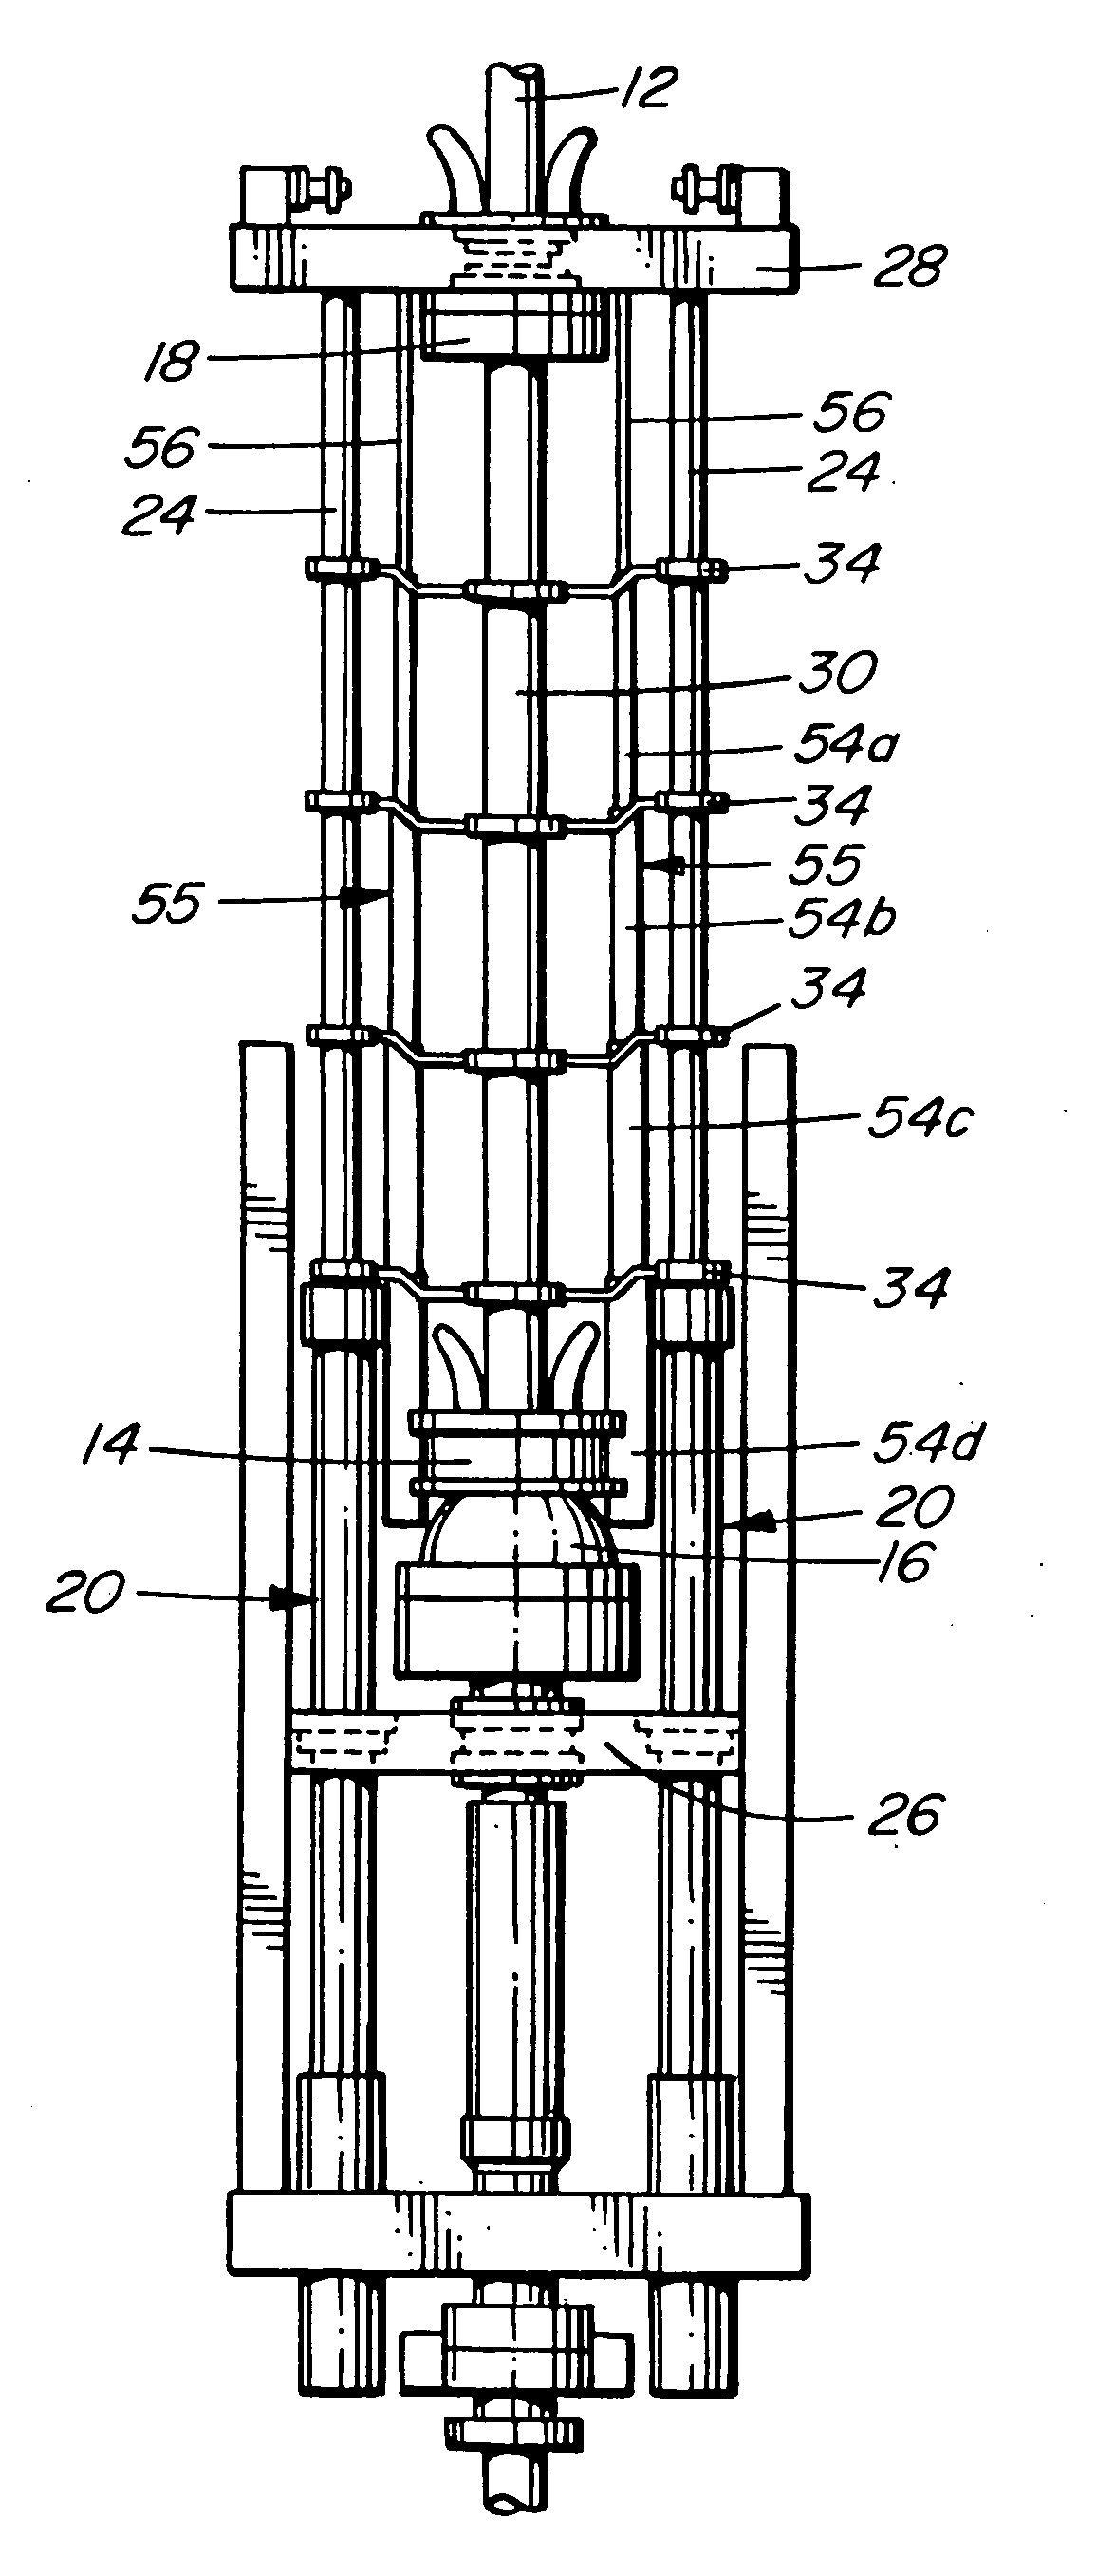 Pipe guides and methods of guiding pipes in snubbing units